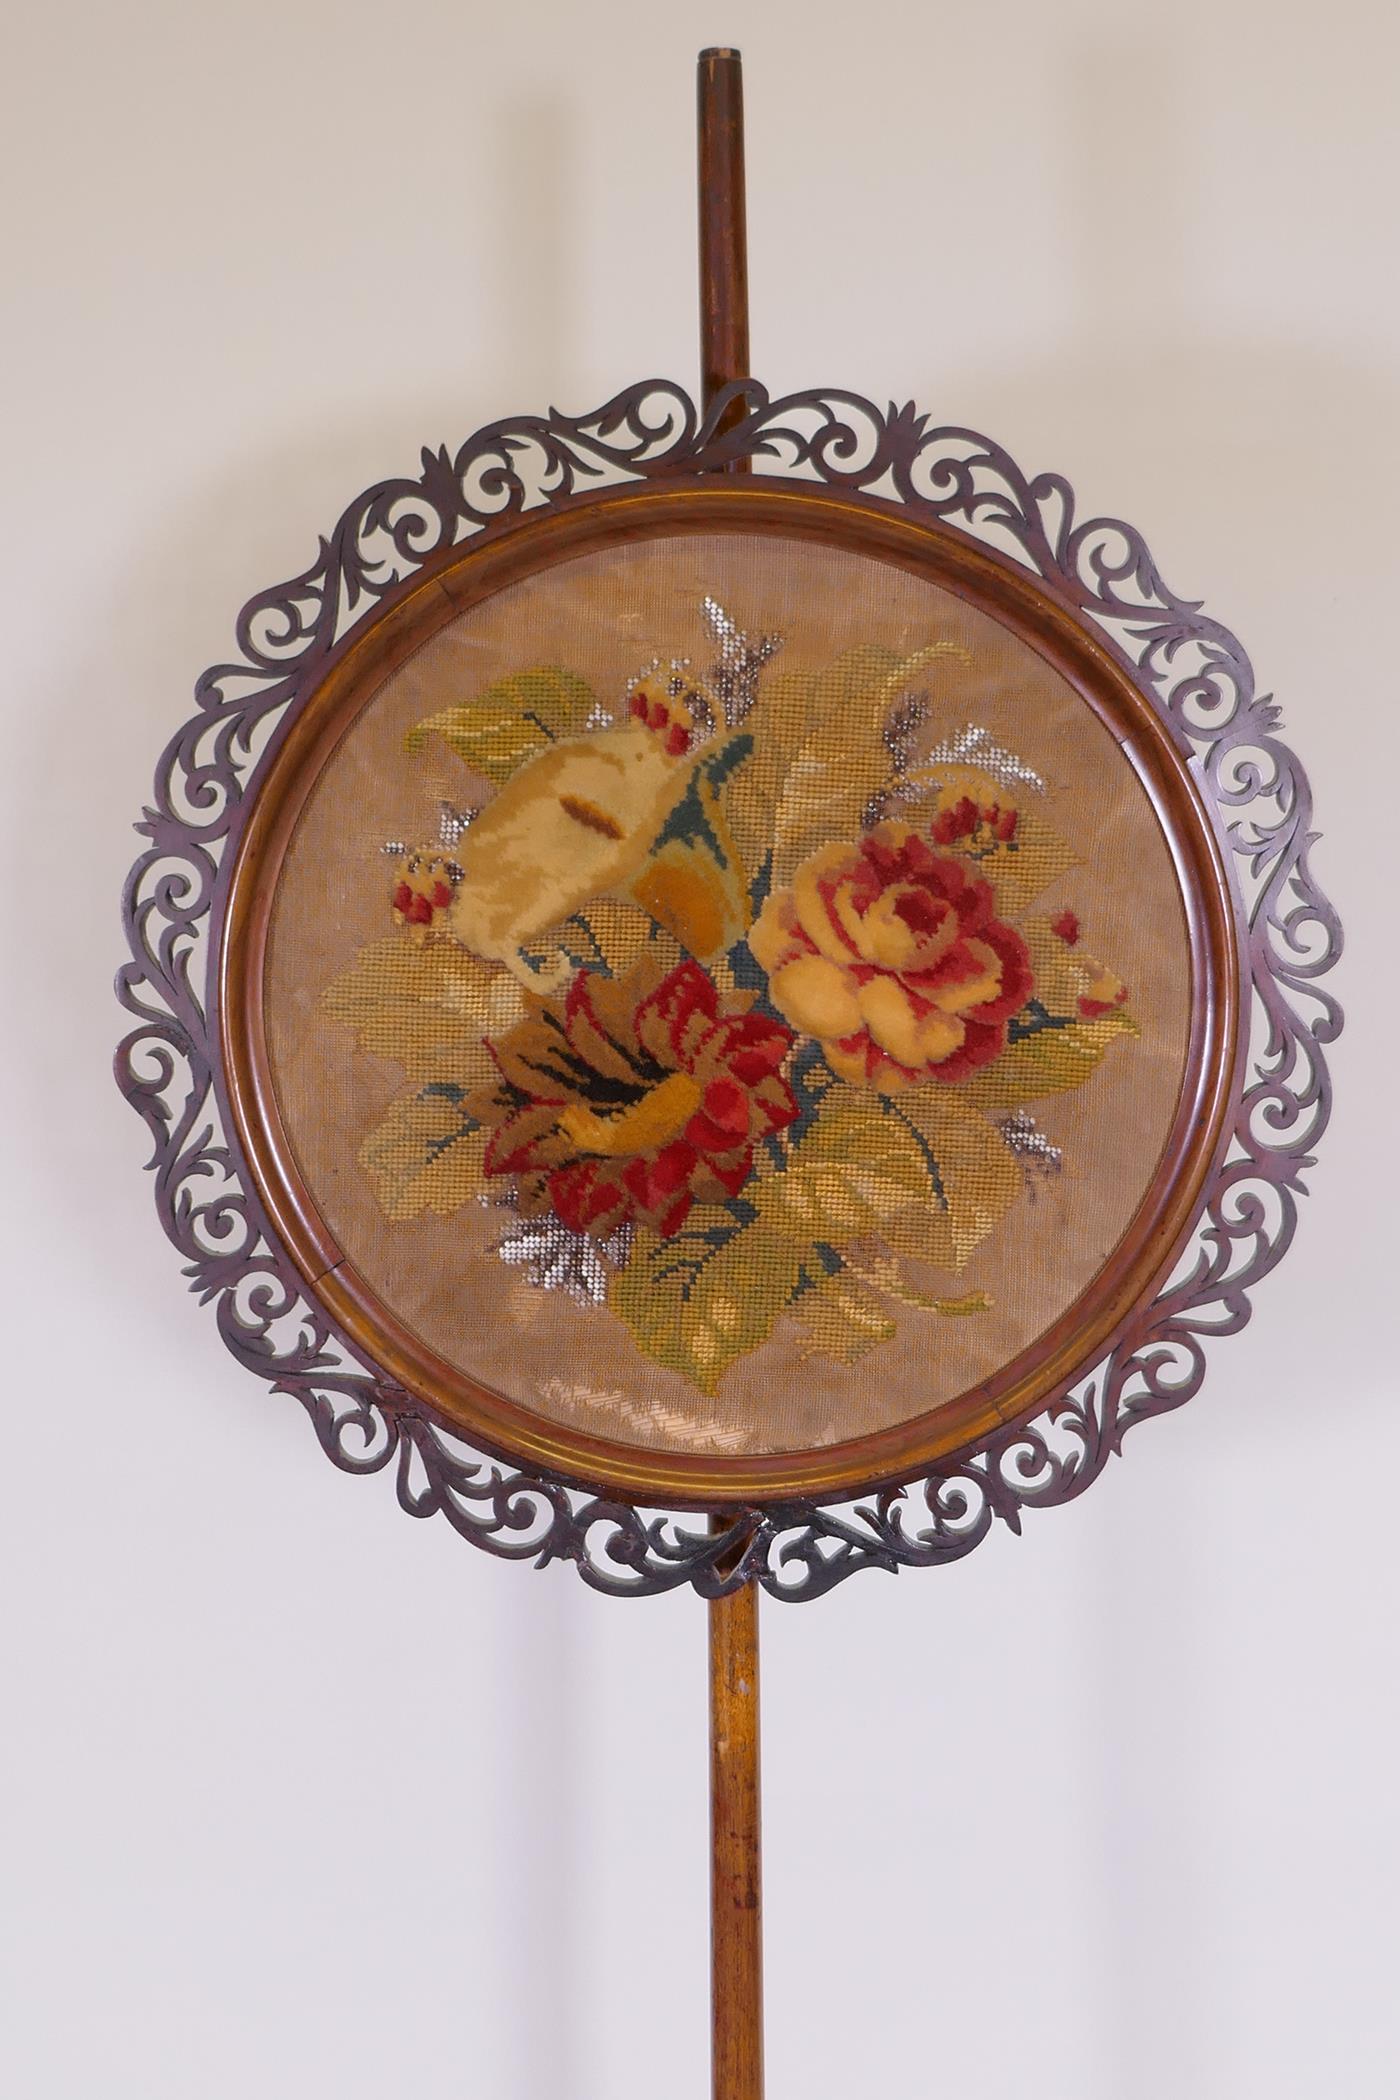 A C19th mahogany barley twist pole screen with embroidered panel, 162cm high - Image 3 of 3